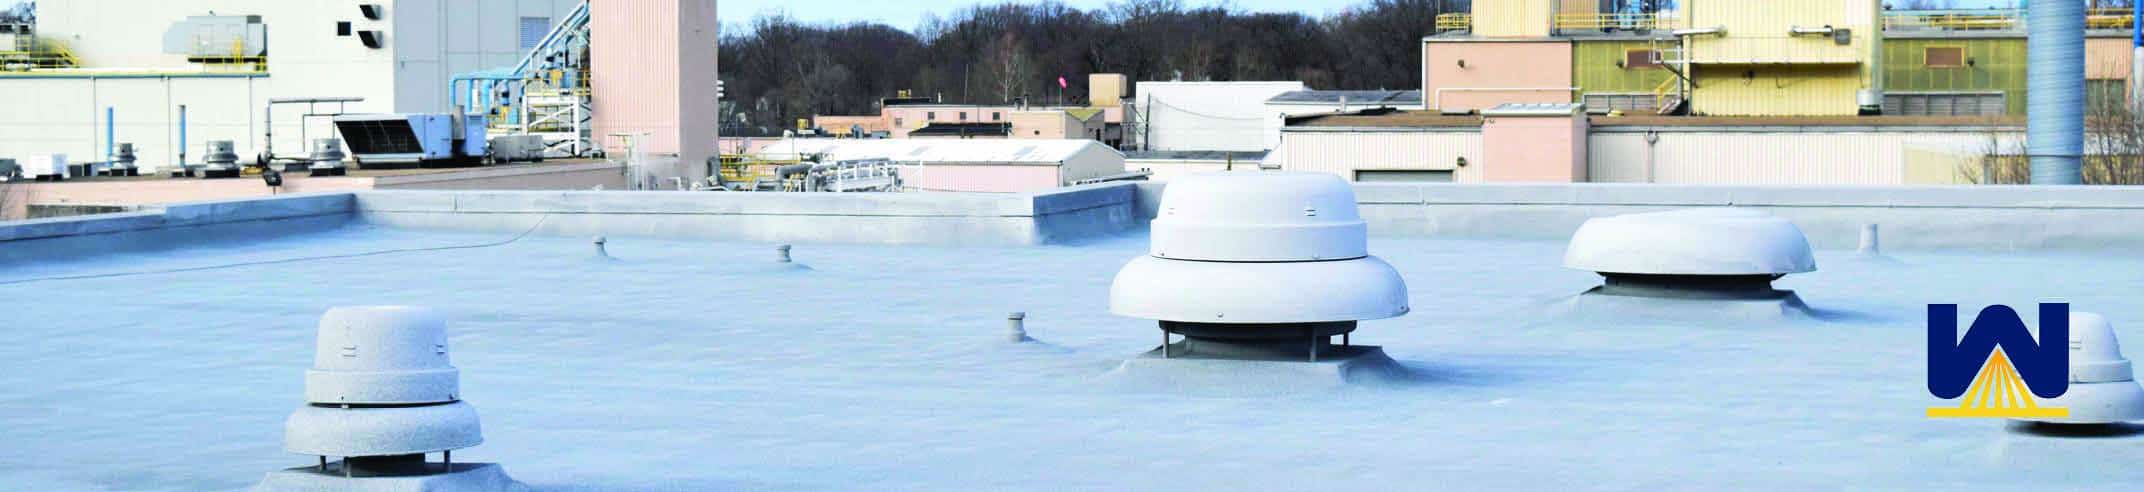 What’s the Cost of a Commercial Spray Foam Roofing System?